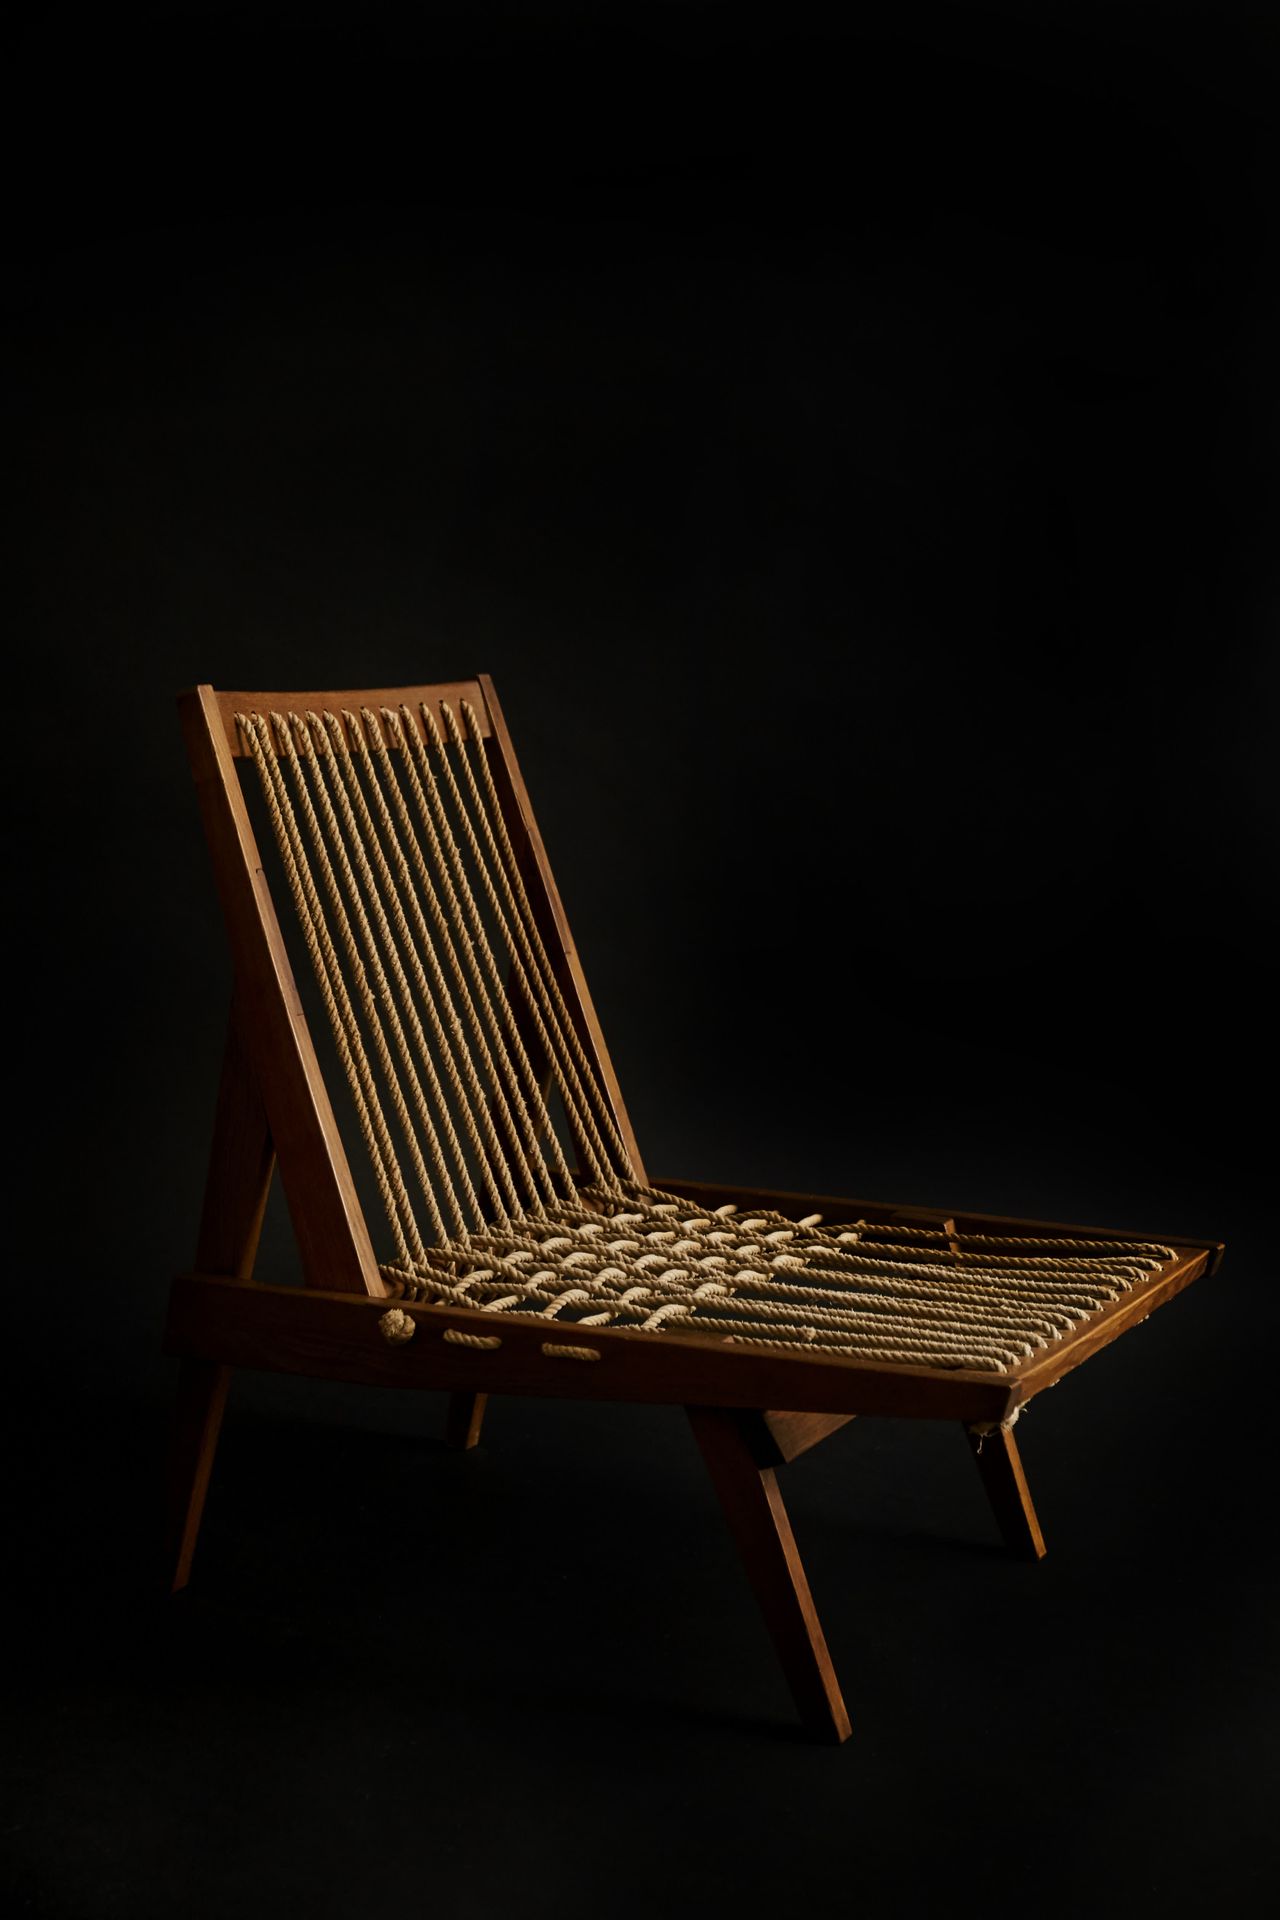 RIKI WATANABE Rope chair---Chauffeuse
 Oak and rope
1952
H 72.5 W53.5 D80 cm